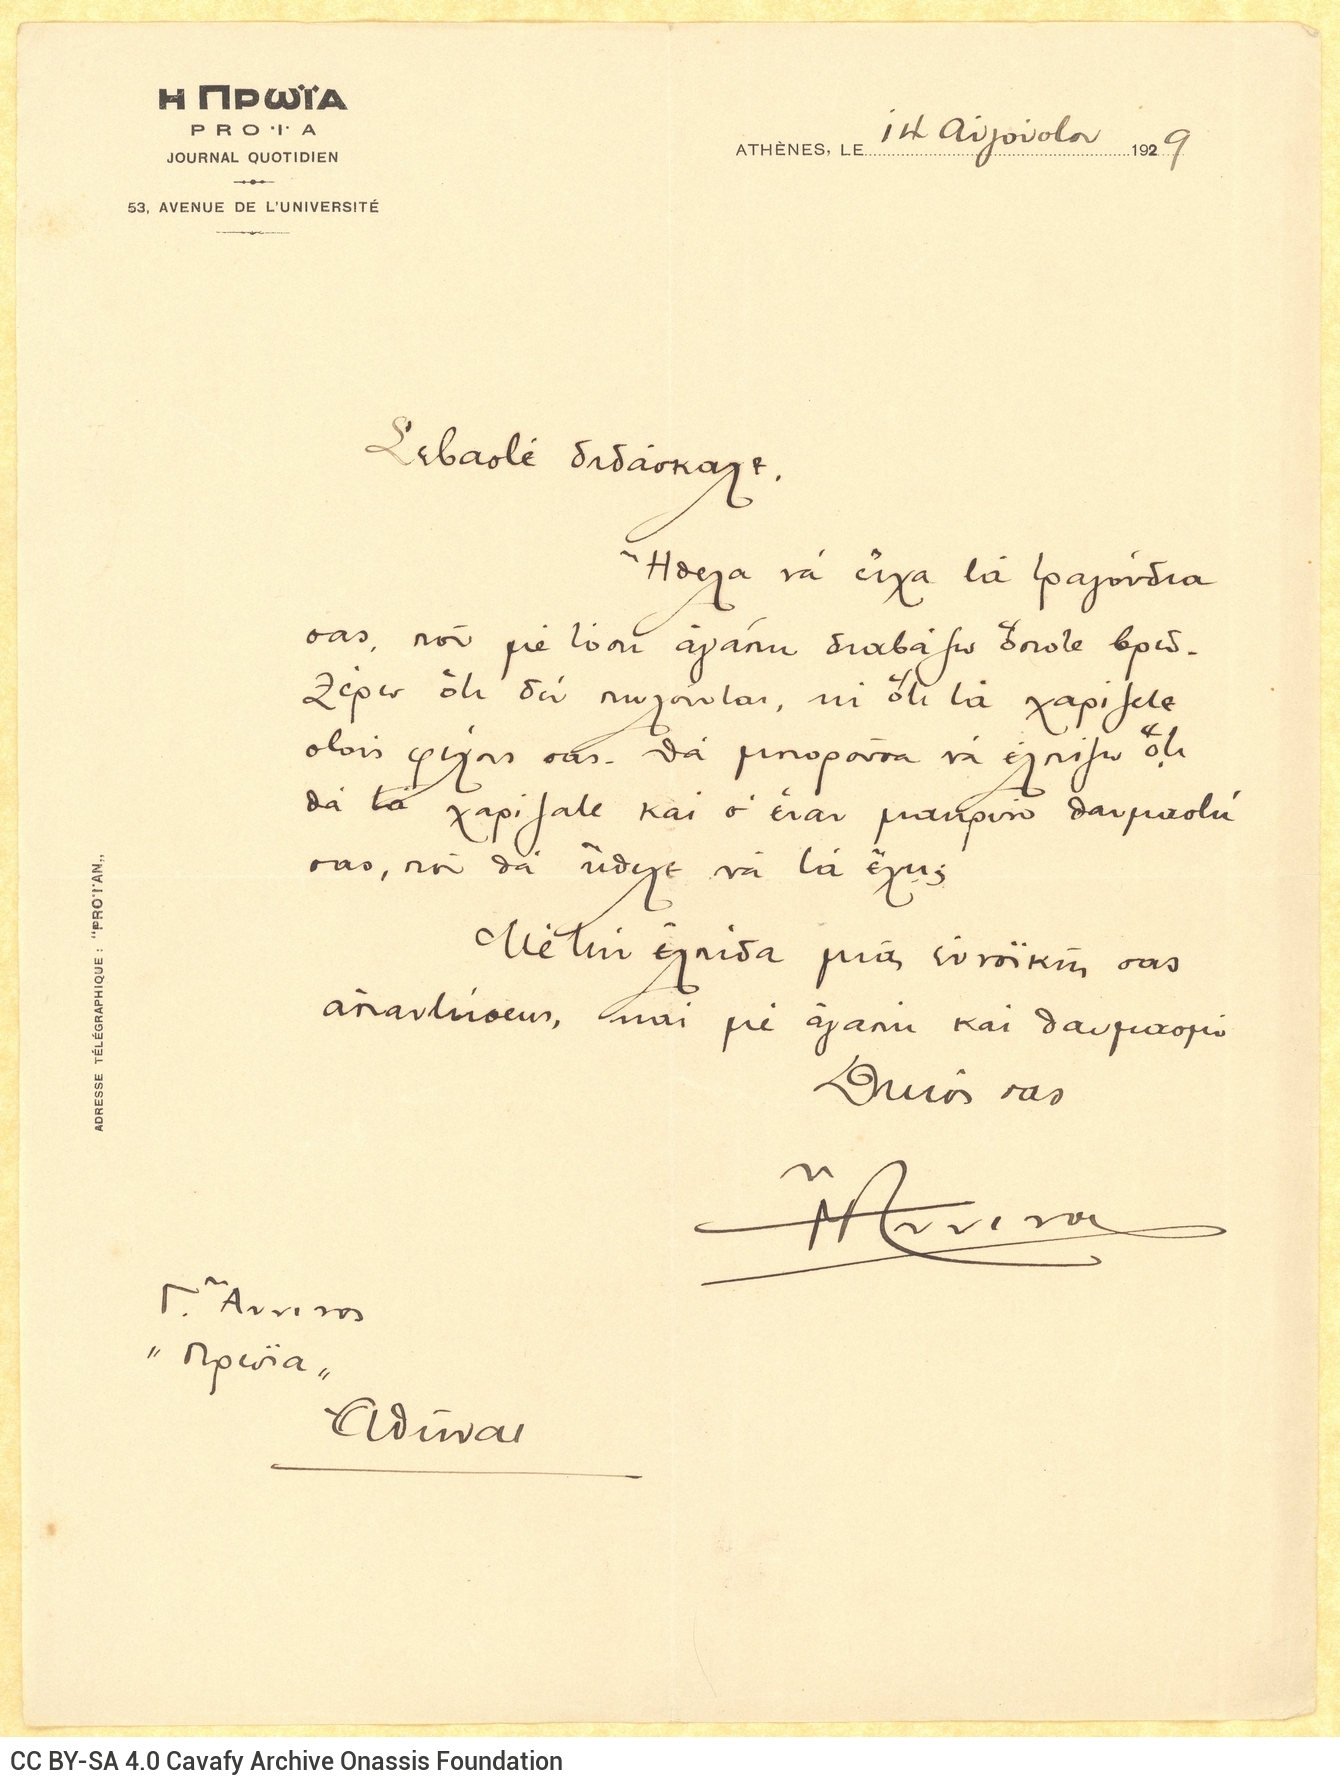 Handwritten letter by G. Anninos to Cavafy on one side of a letterhead of the newspaper *I Proia*, in which he asks for the d